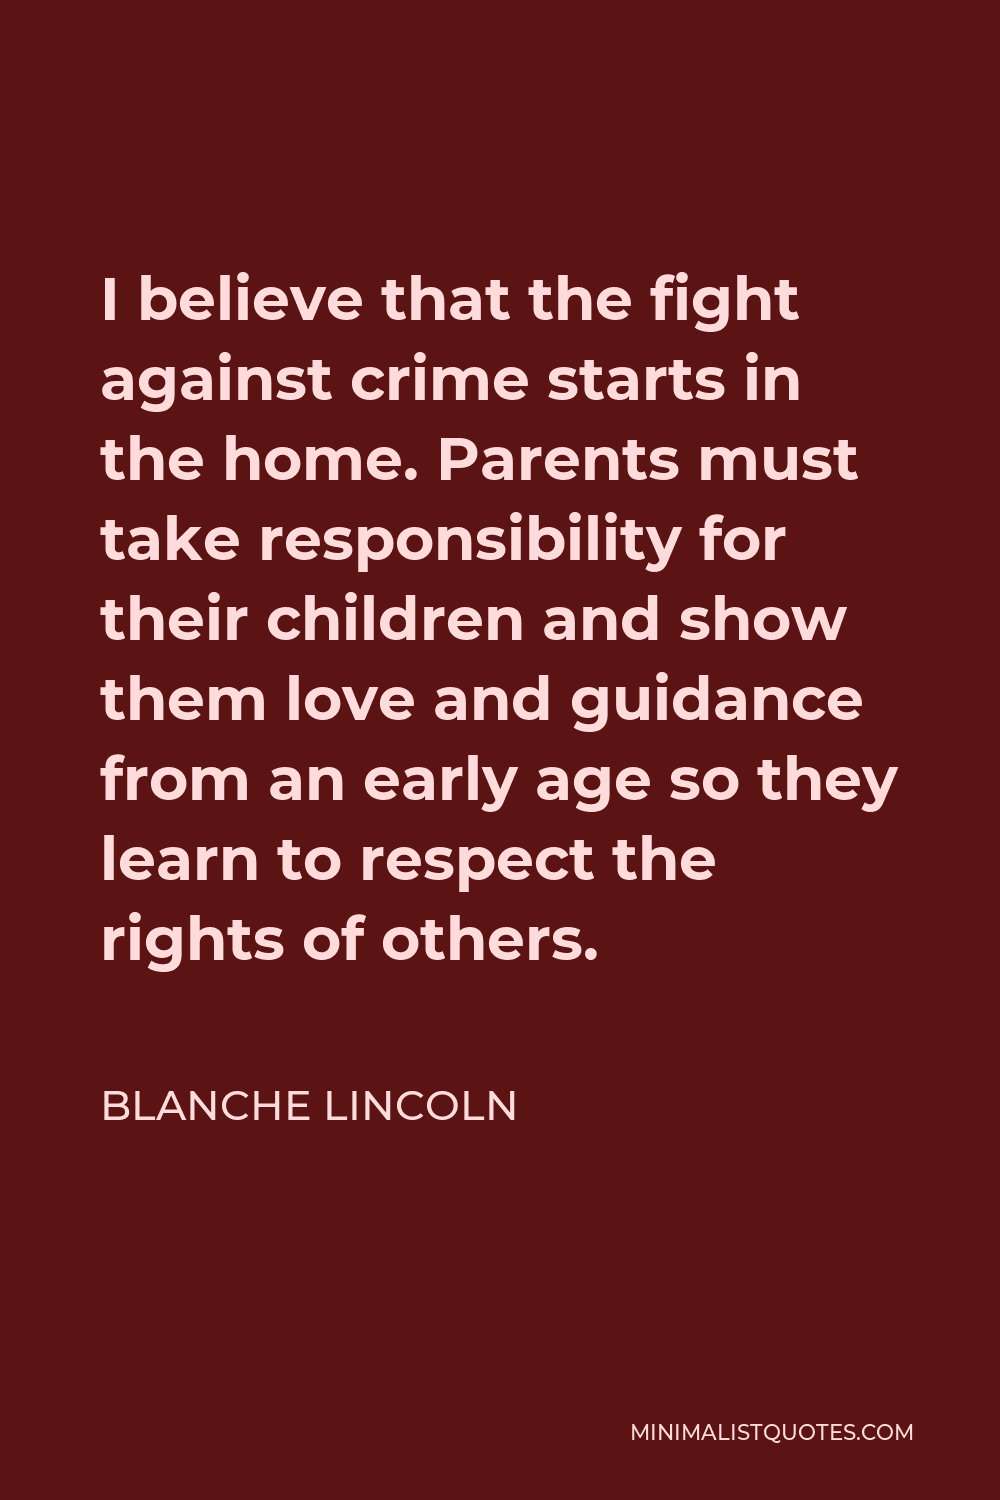 Blanche Lincoln Quote - I believe that the fight against crime starts in the home. Parents must take responsibility for their children and show them love and guidance from an early age so they learn to respect the rights of others.